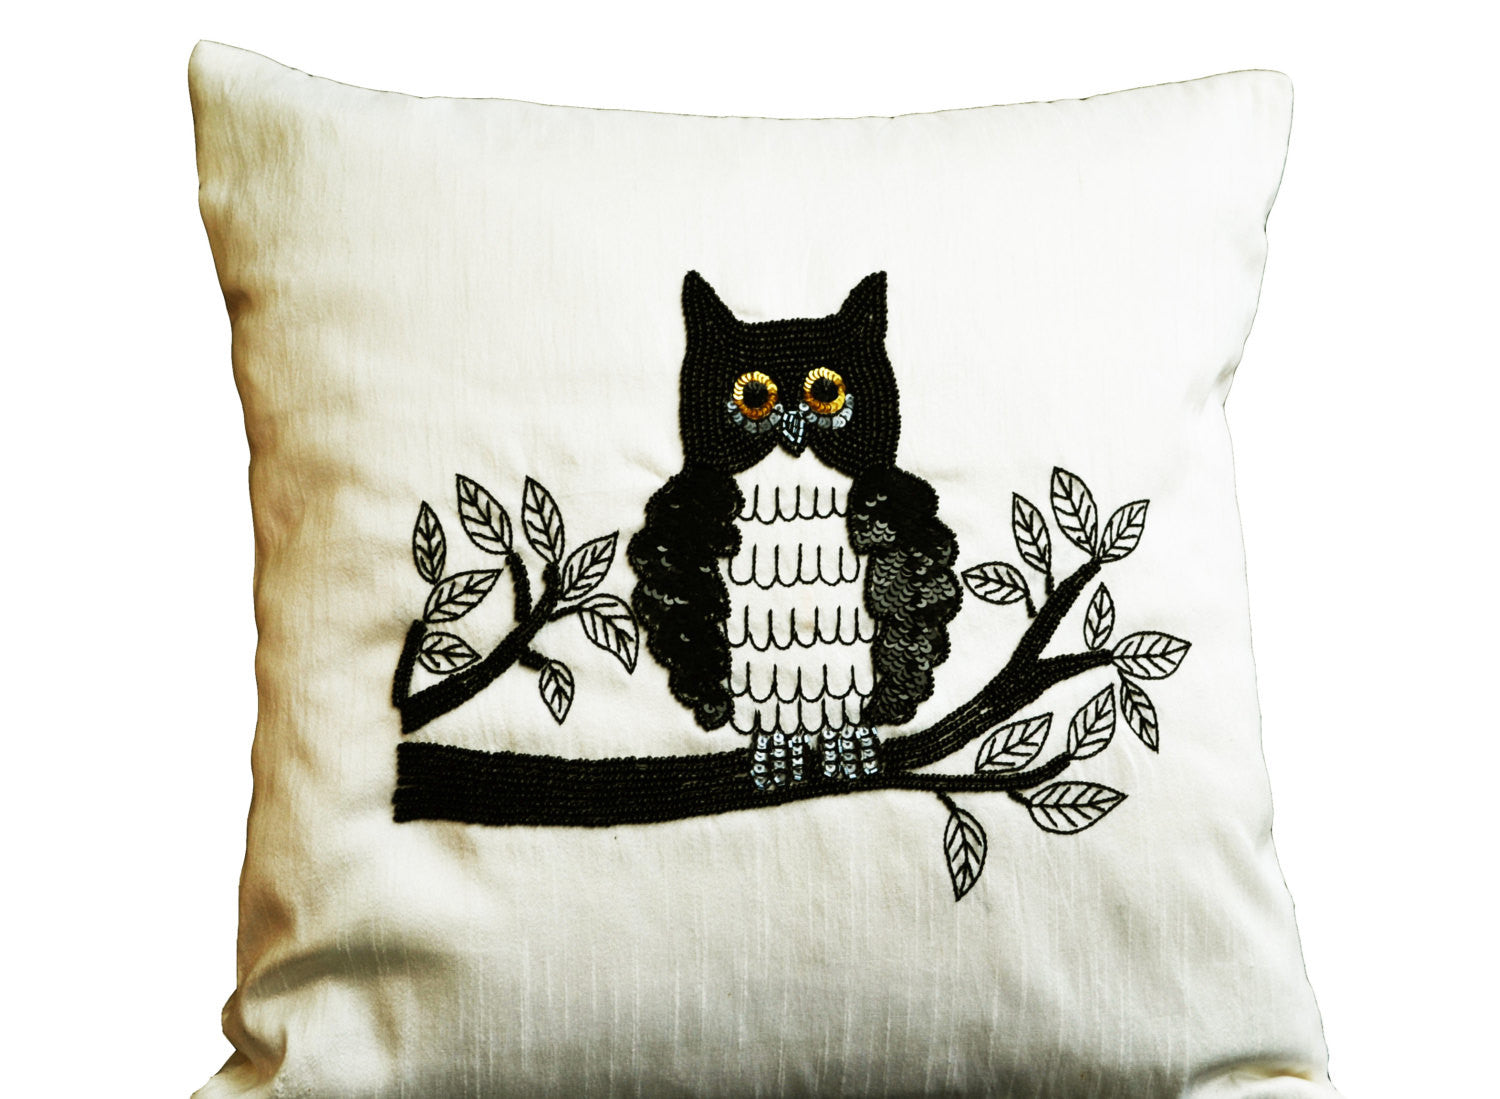 Handmade ivory silk pillow with owl embroidery